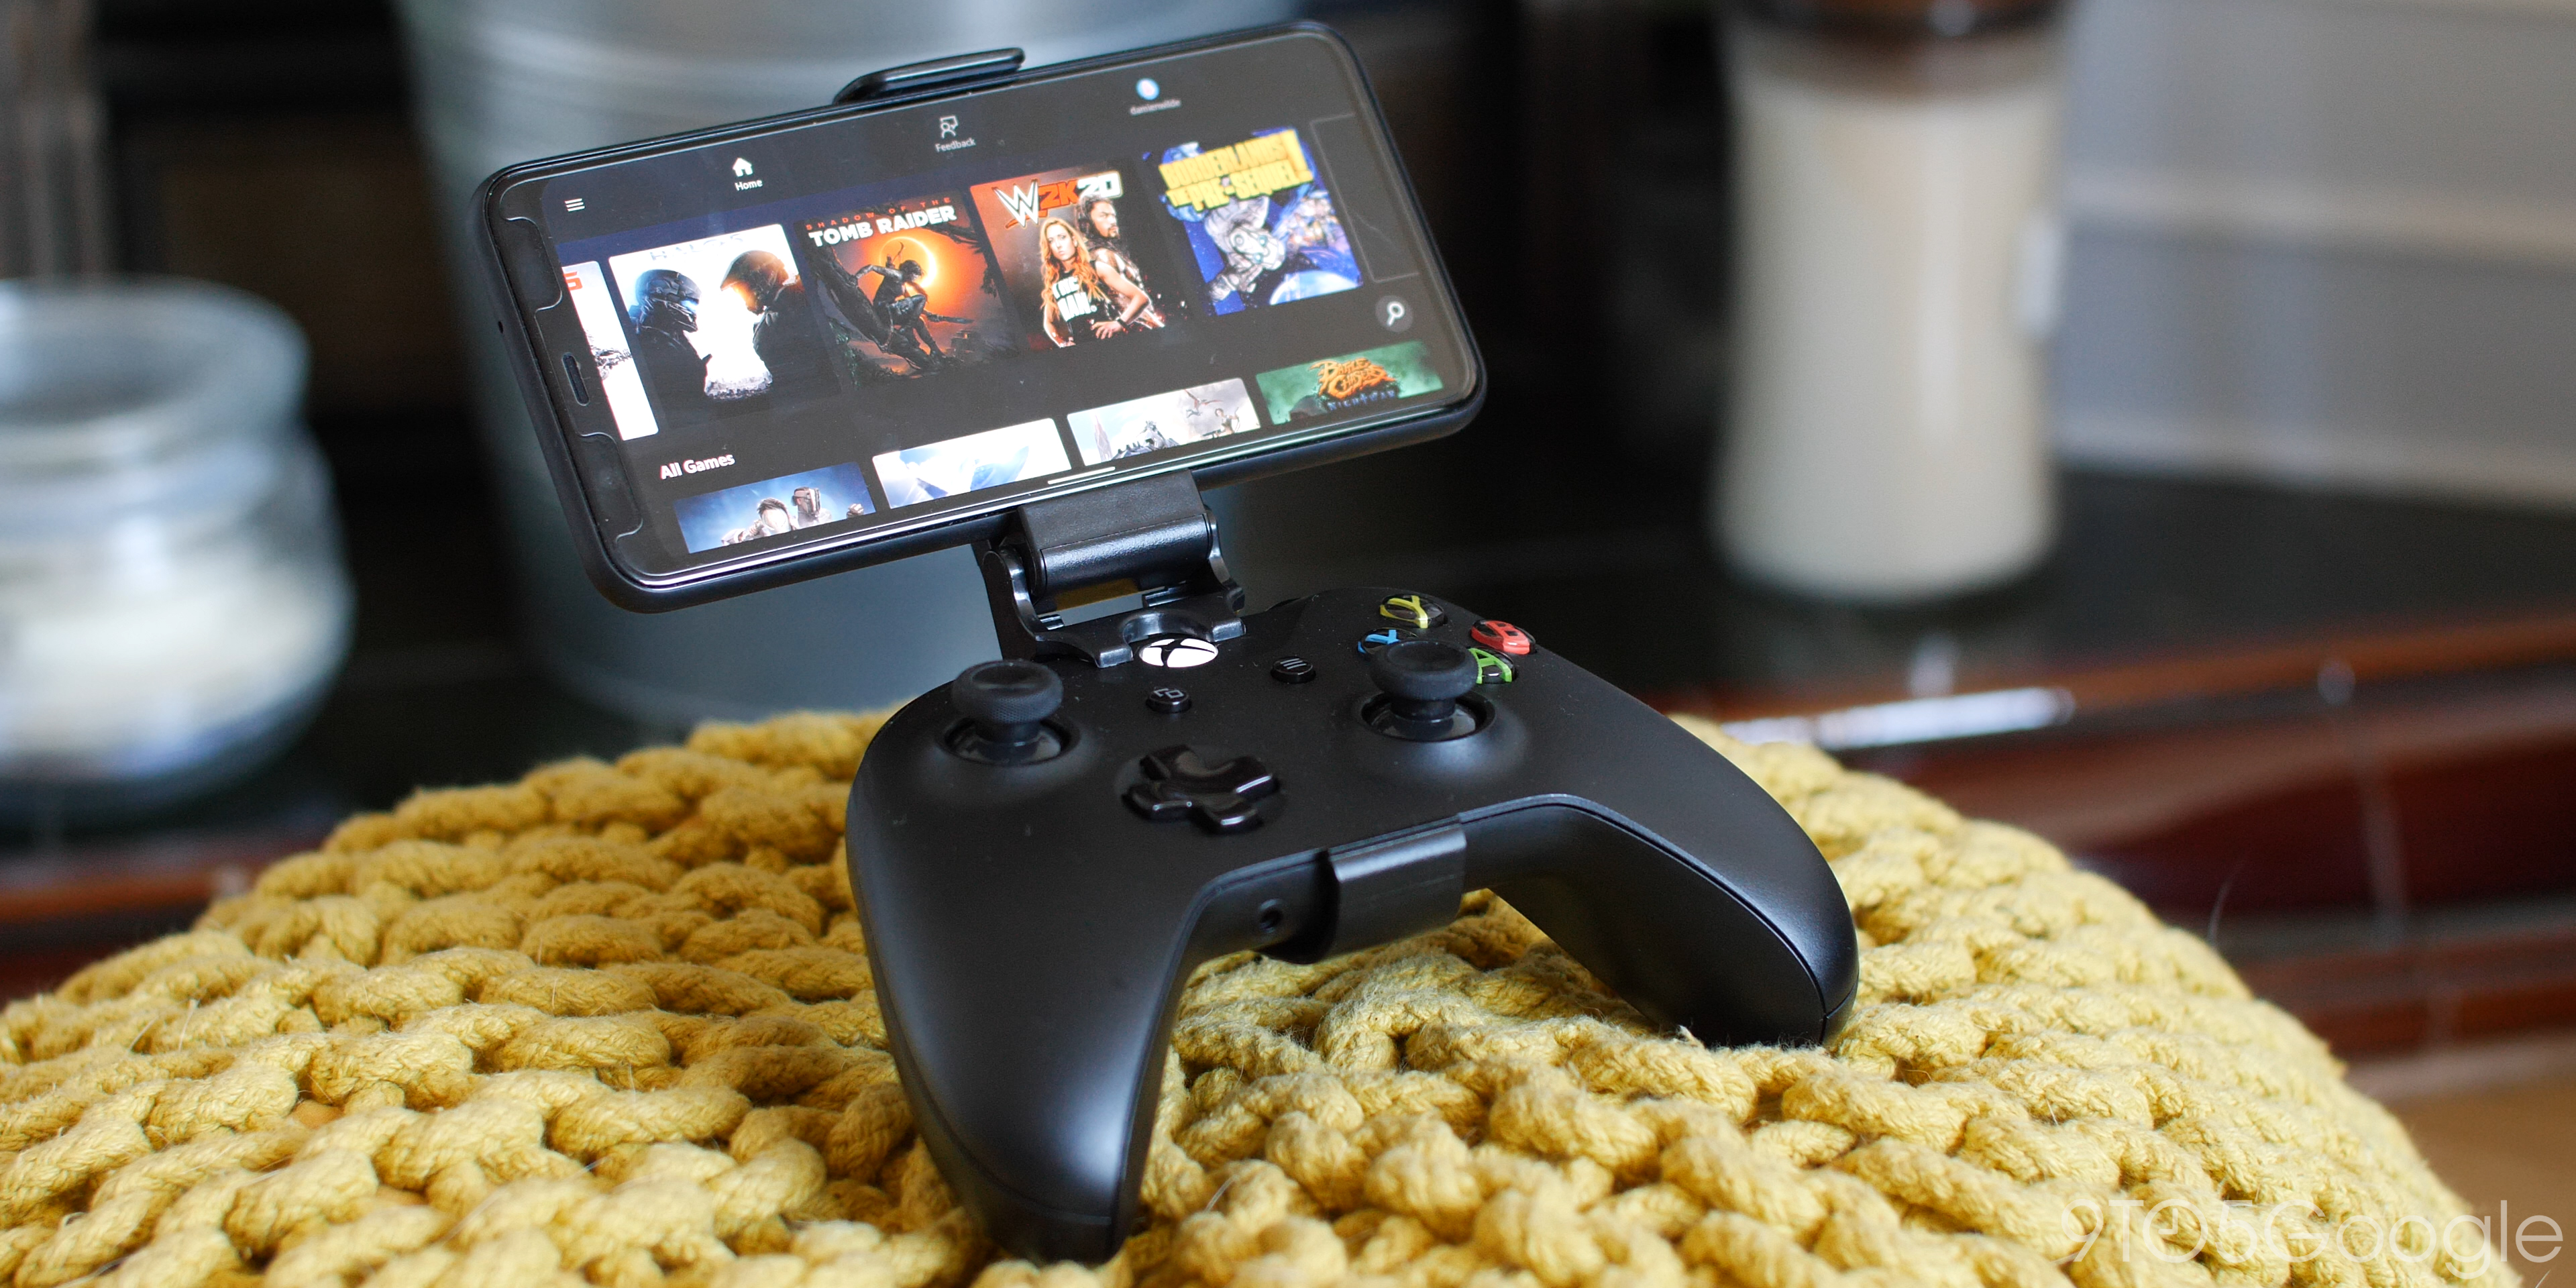 Microsoft xCloud hands-on: Xbox gaming on the go [Video] - 9to5Google